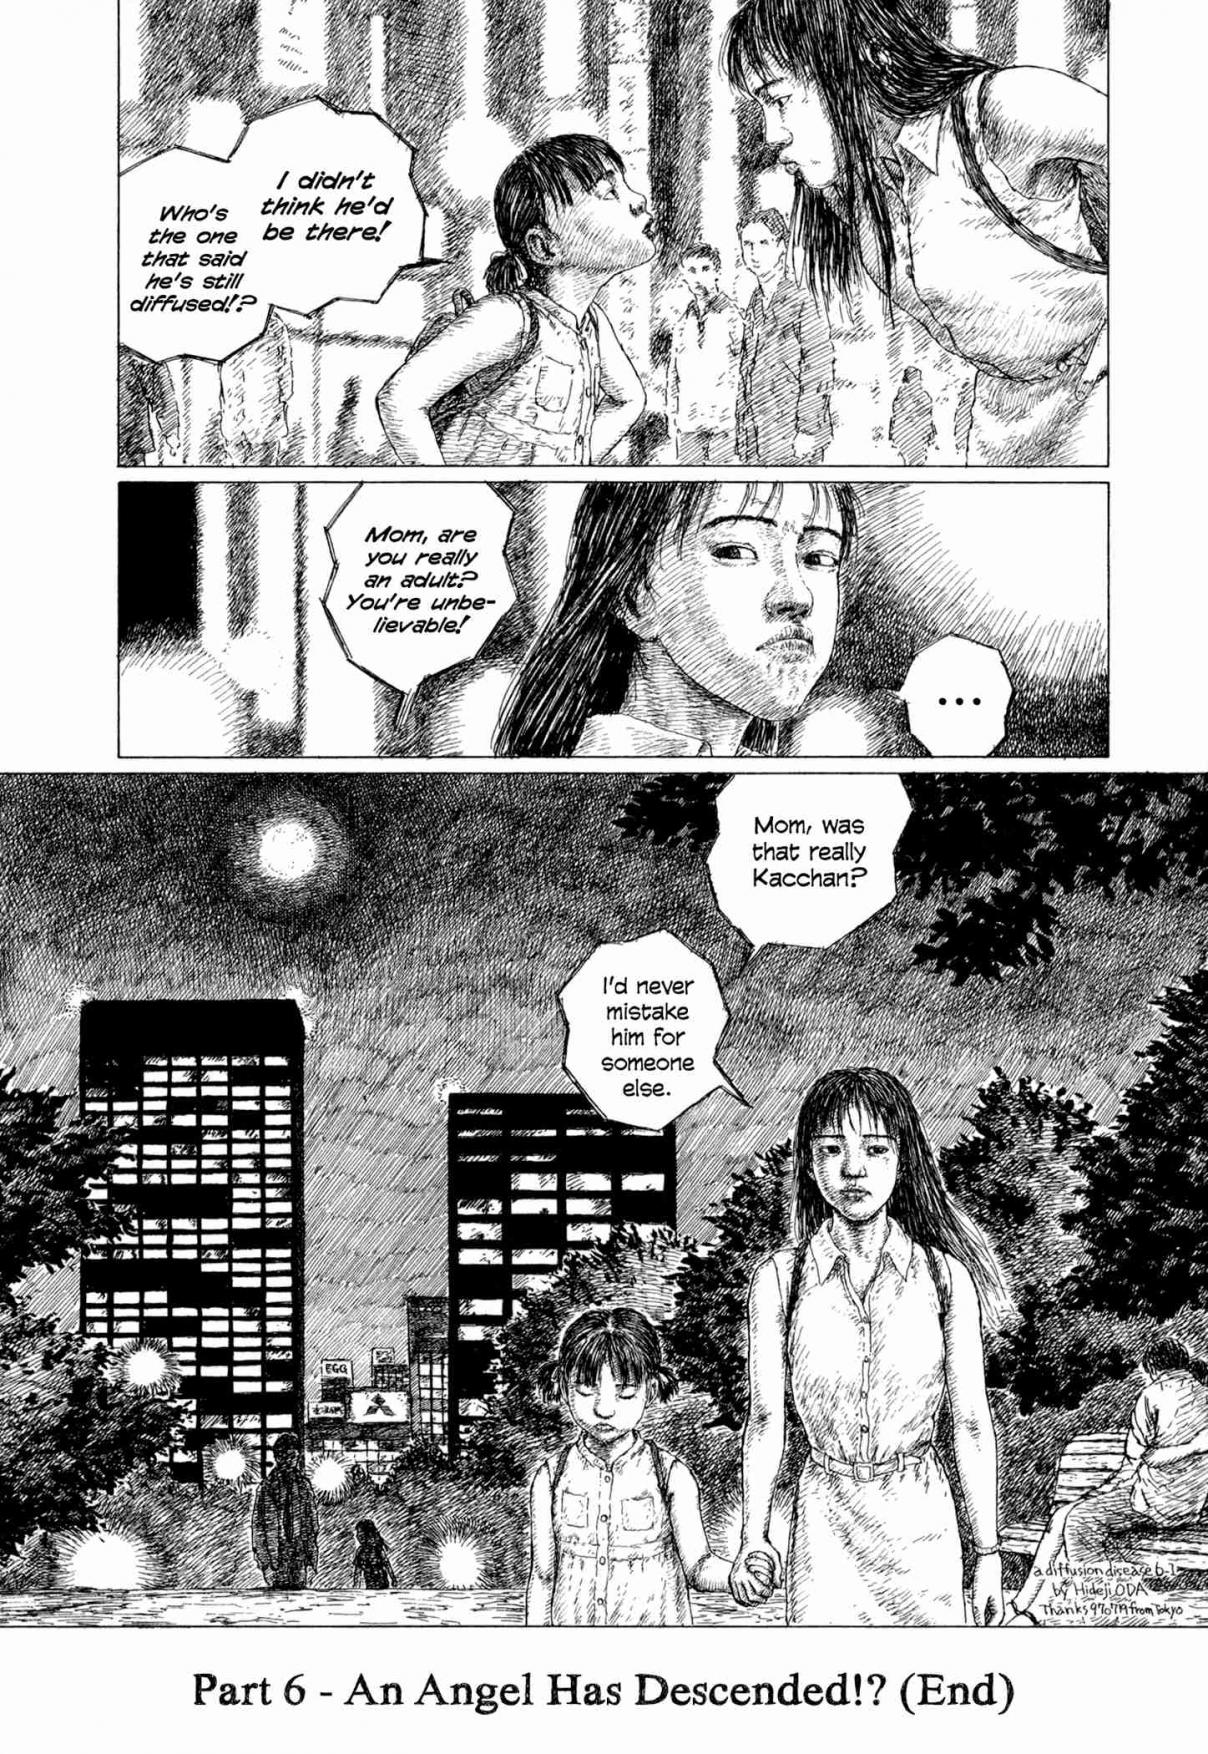 A Diffusion Disease Vol. 2 Ch. 6 An Angel Has Descended!?